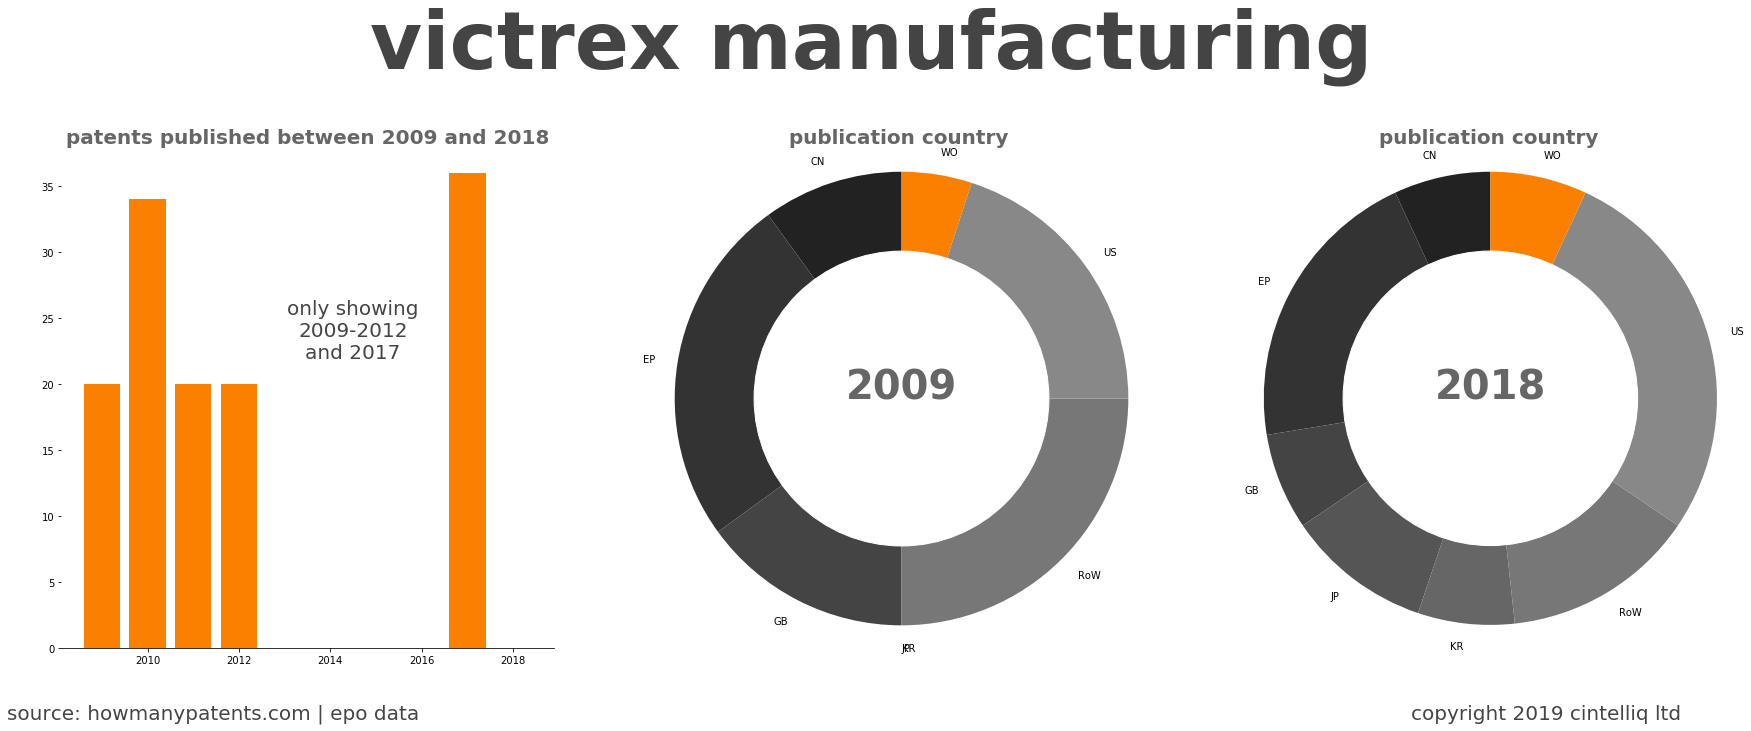 summary of patents for Victrex Manufacturing